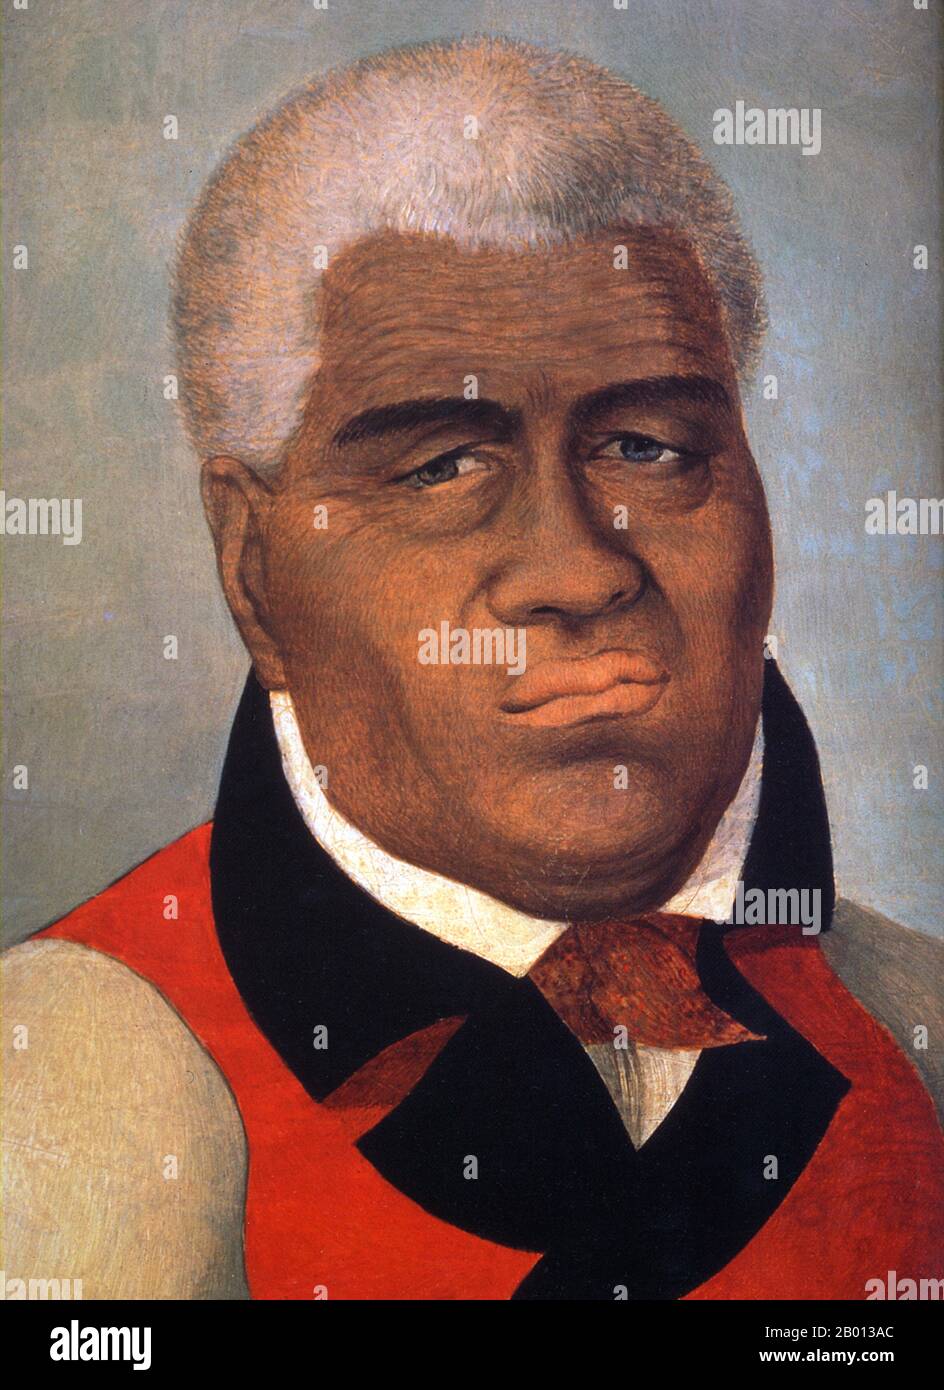 USA: 'Tamaahamaah, King of Sandwich Islands'. King Kamehameha I (1736 - 10 May 1819), ruler of Hawaii (r. 1758-1819). Portrait, c. late 18th - early 19th century.  Kamehameha I (1736-1819), also known as Paiea and Kamehameha the Great, conquered the Hawaiian Islands and formally established the Kingdom of Hawaii in 1810. By developing alliances with the major Pacific colonial powers, Kamehameha preserved Hawaii's independence under his rule. Stock Photo